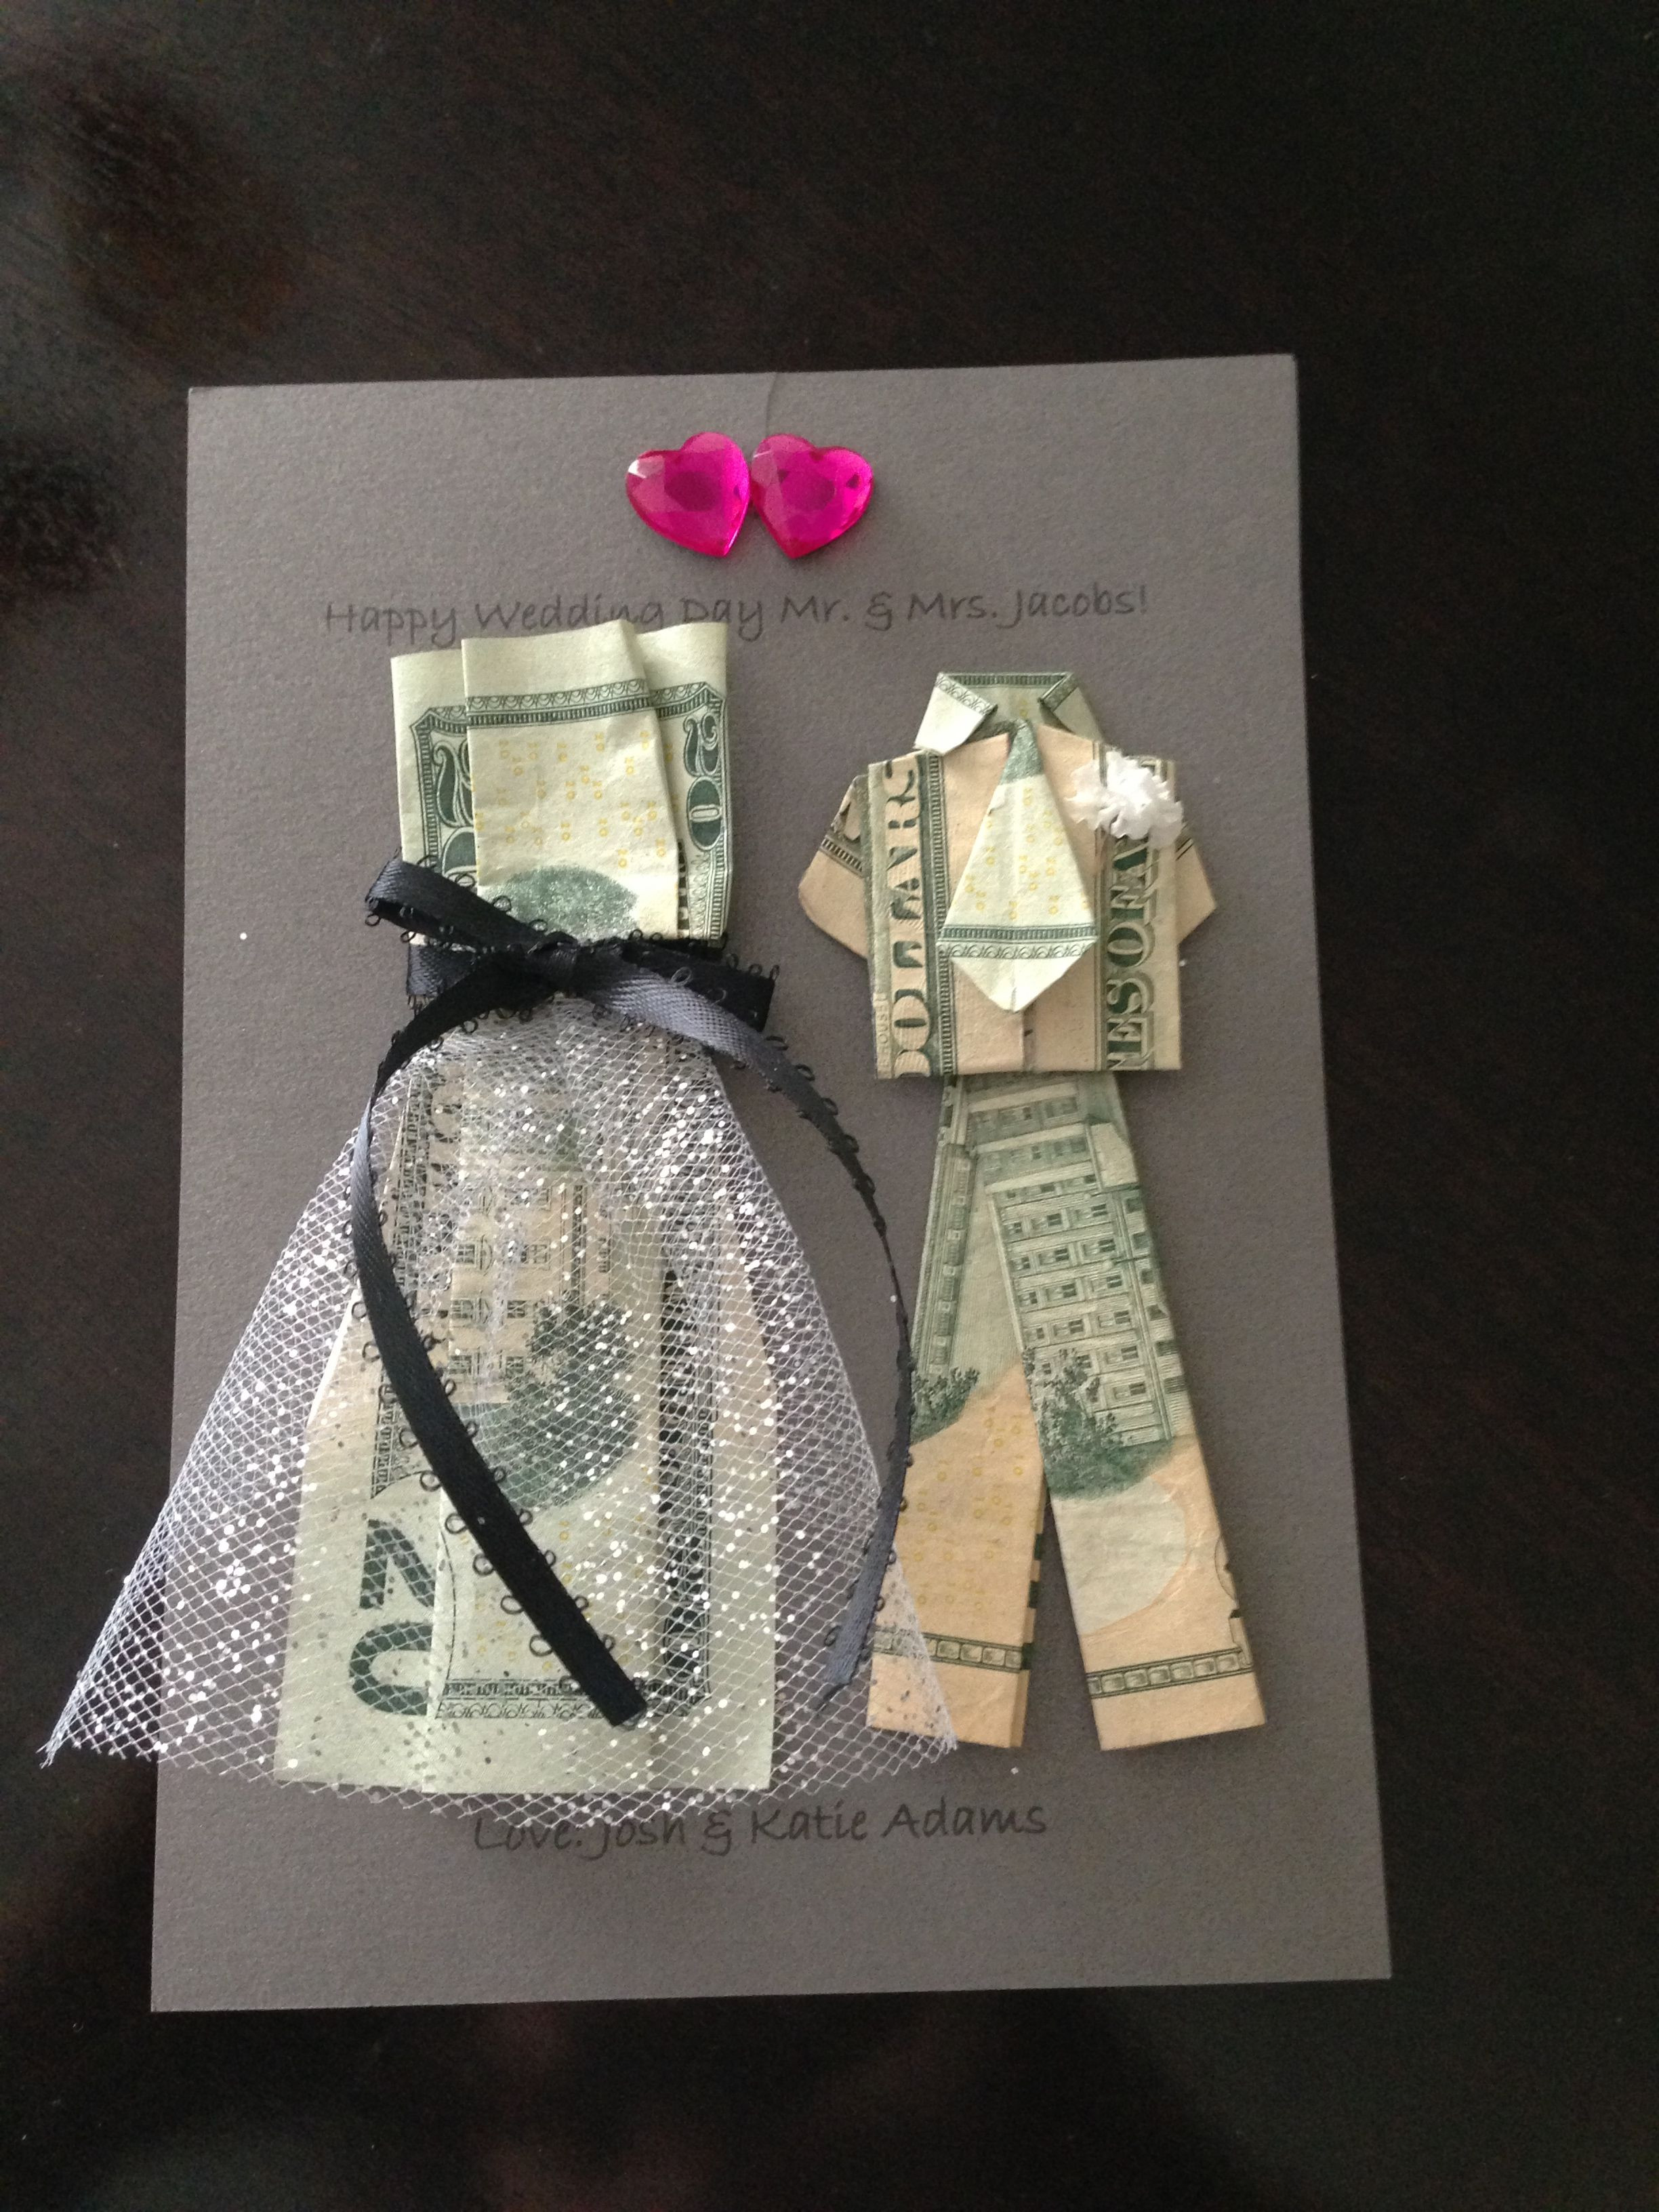 Ideas For A Wedding Gift
 Wedding Money Gifts on Pinterest